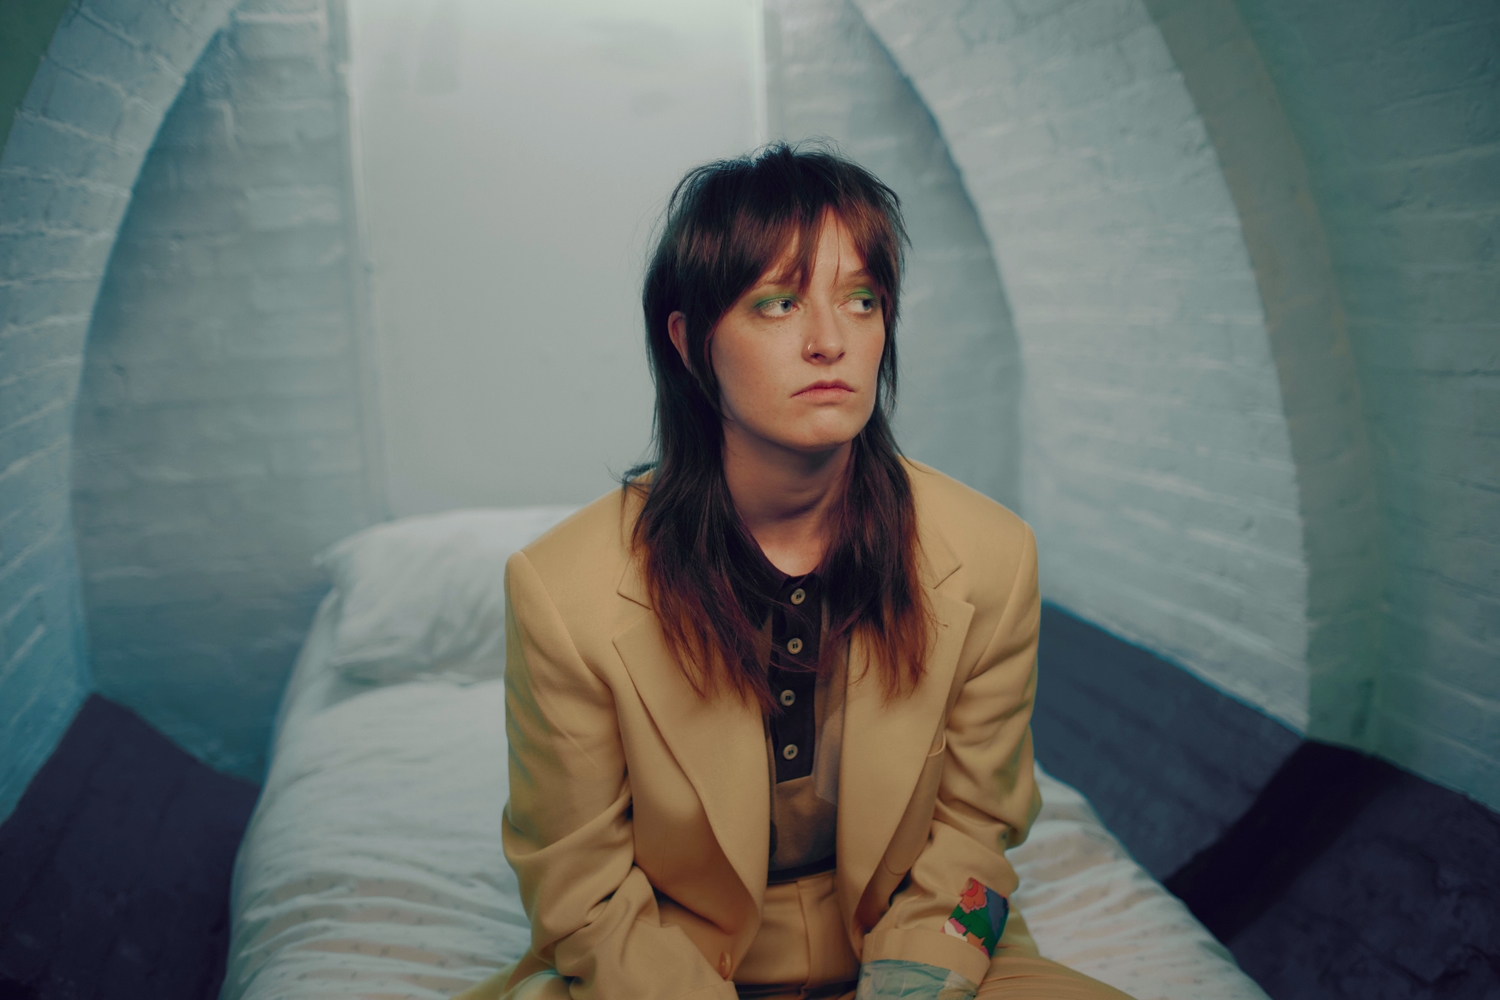 Orla Gartland releases new single ‘You’re Not Special, Babe’